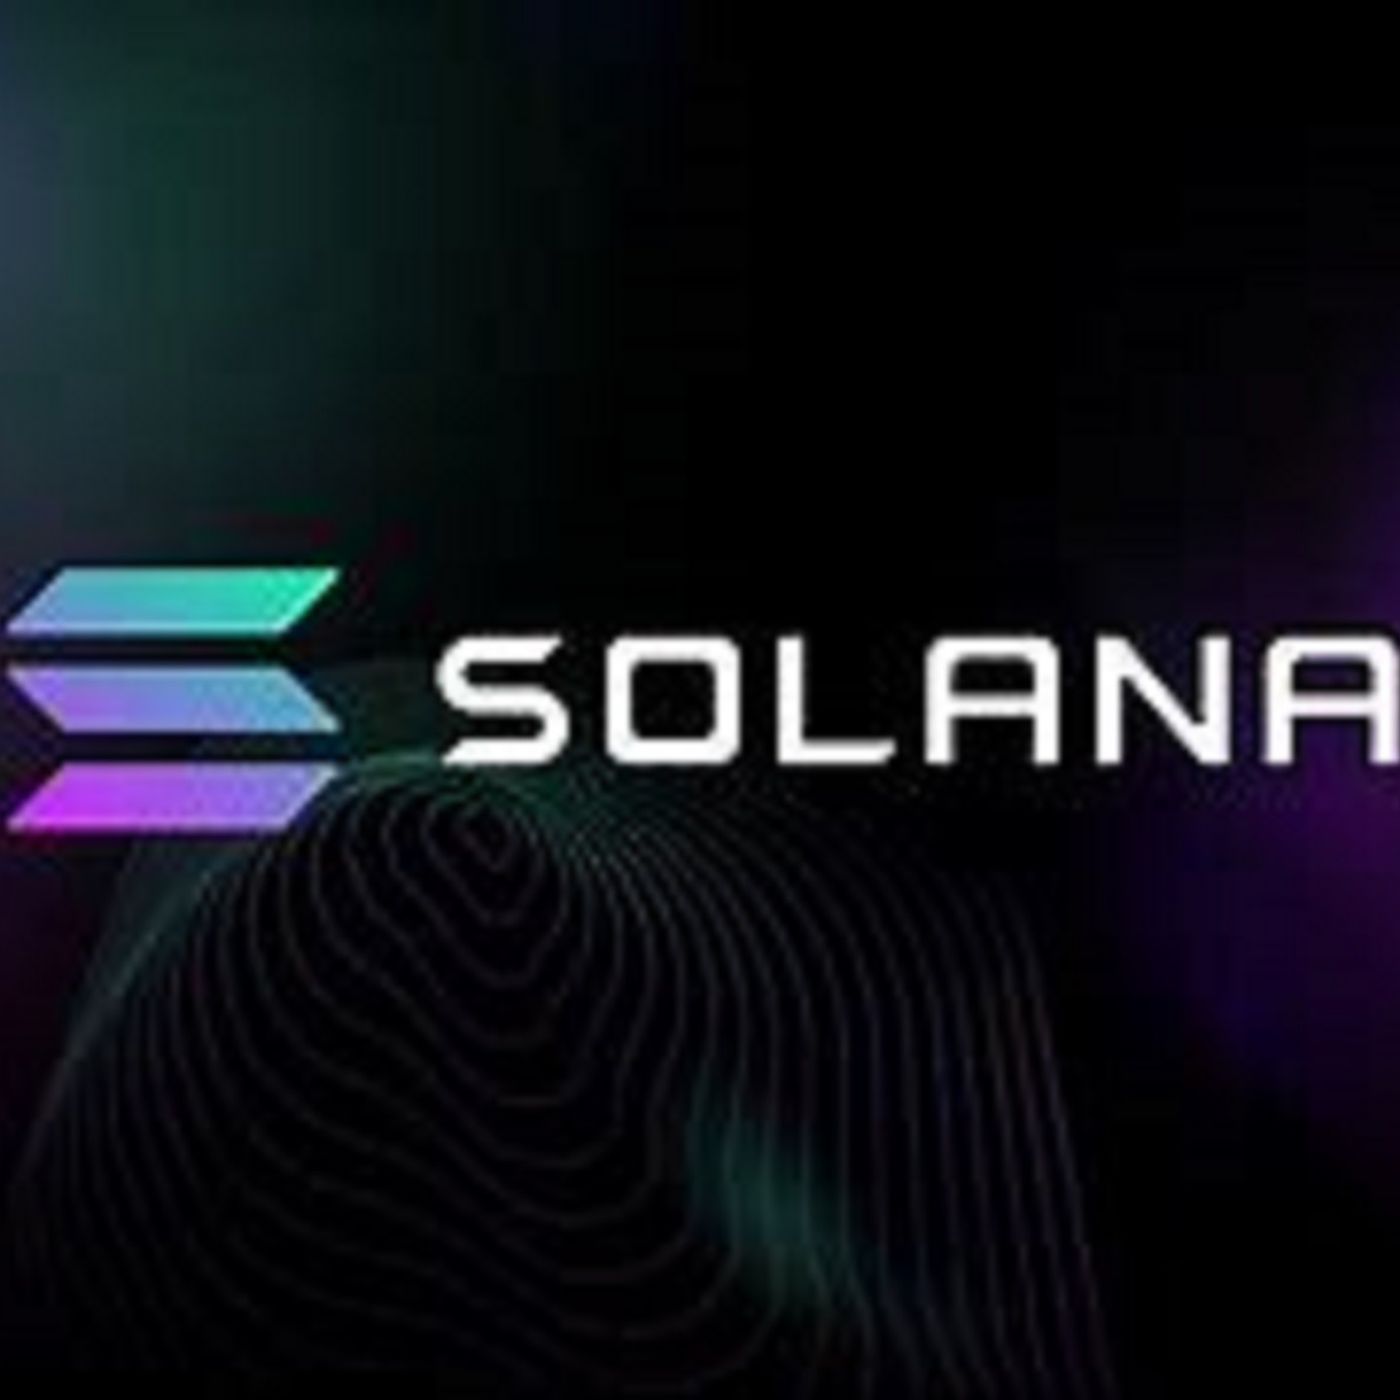 SOL Price Restarts Rally – Why Solana Could Surge Over 10%